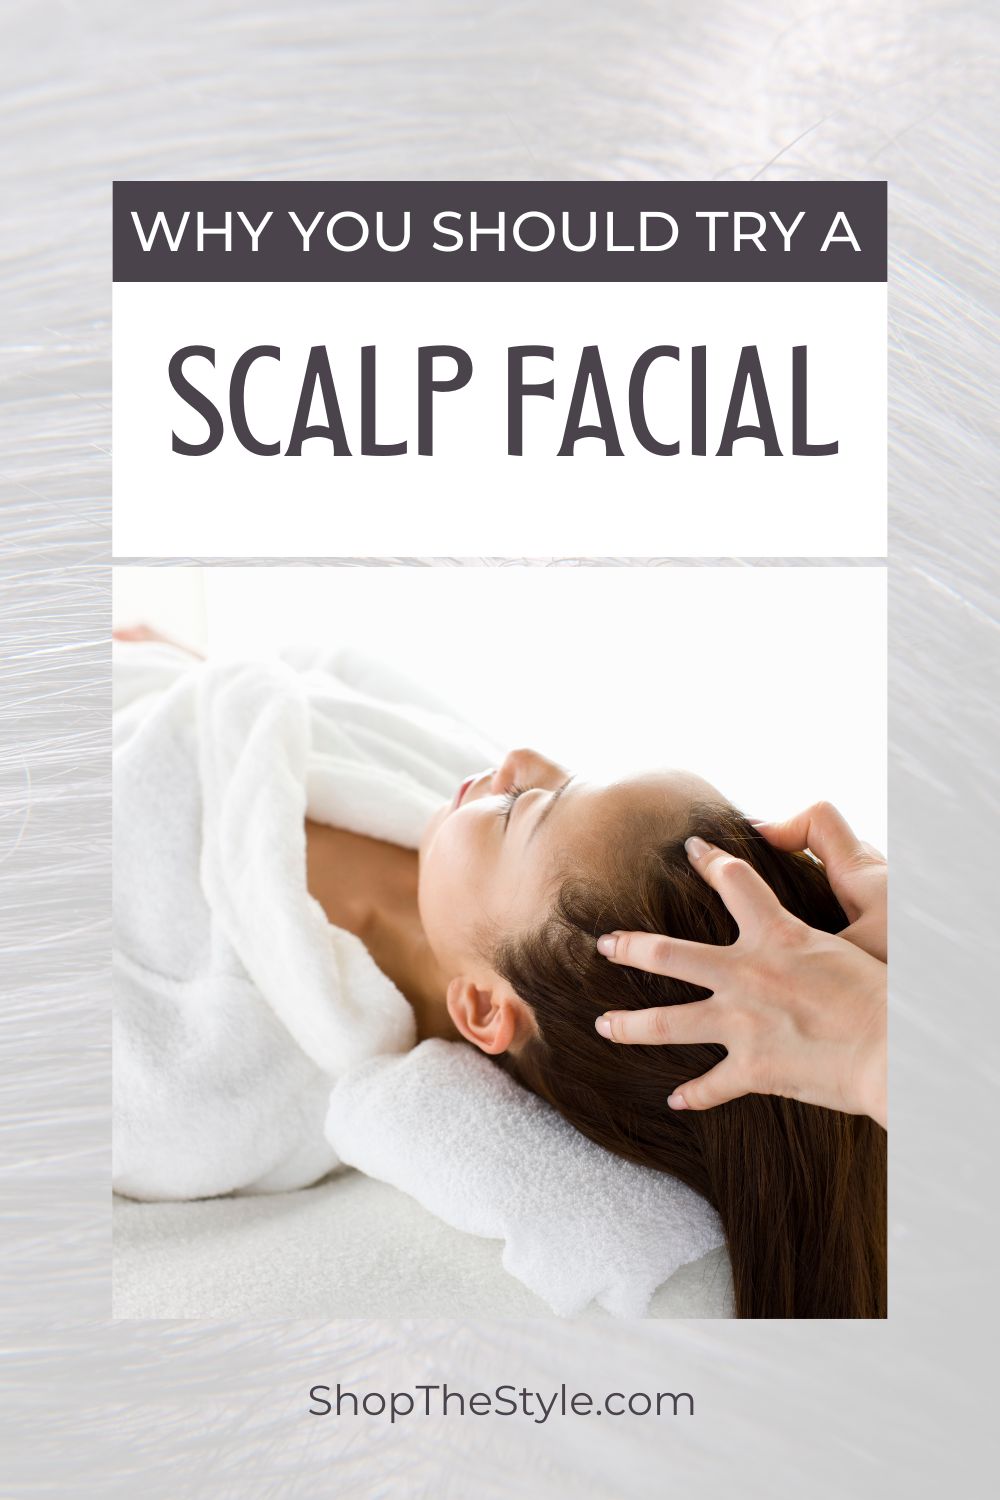 Why You Should Try a Scalp Facial